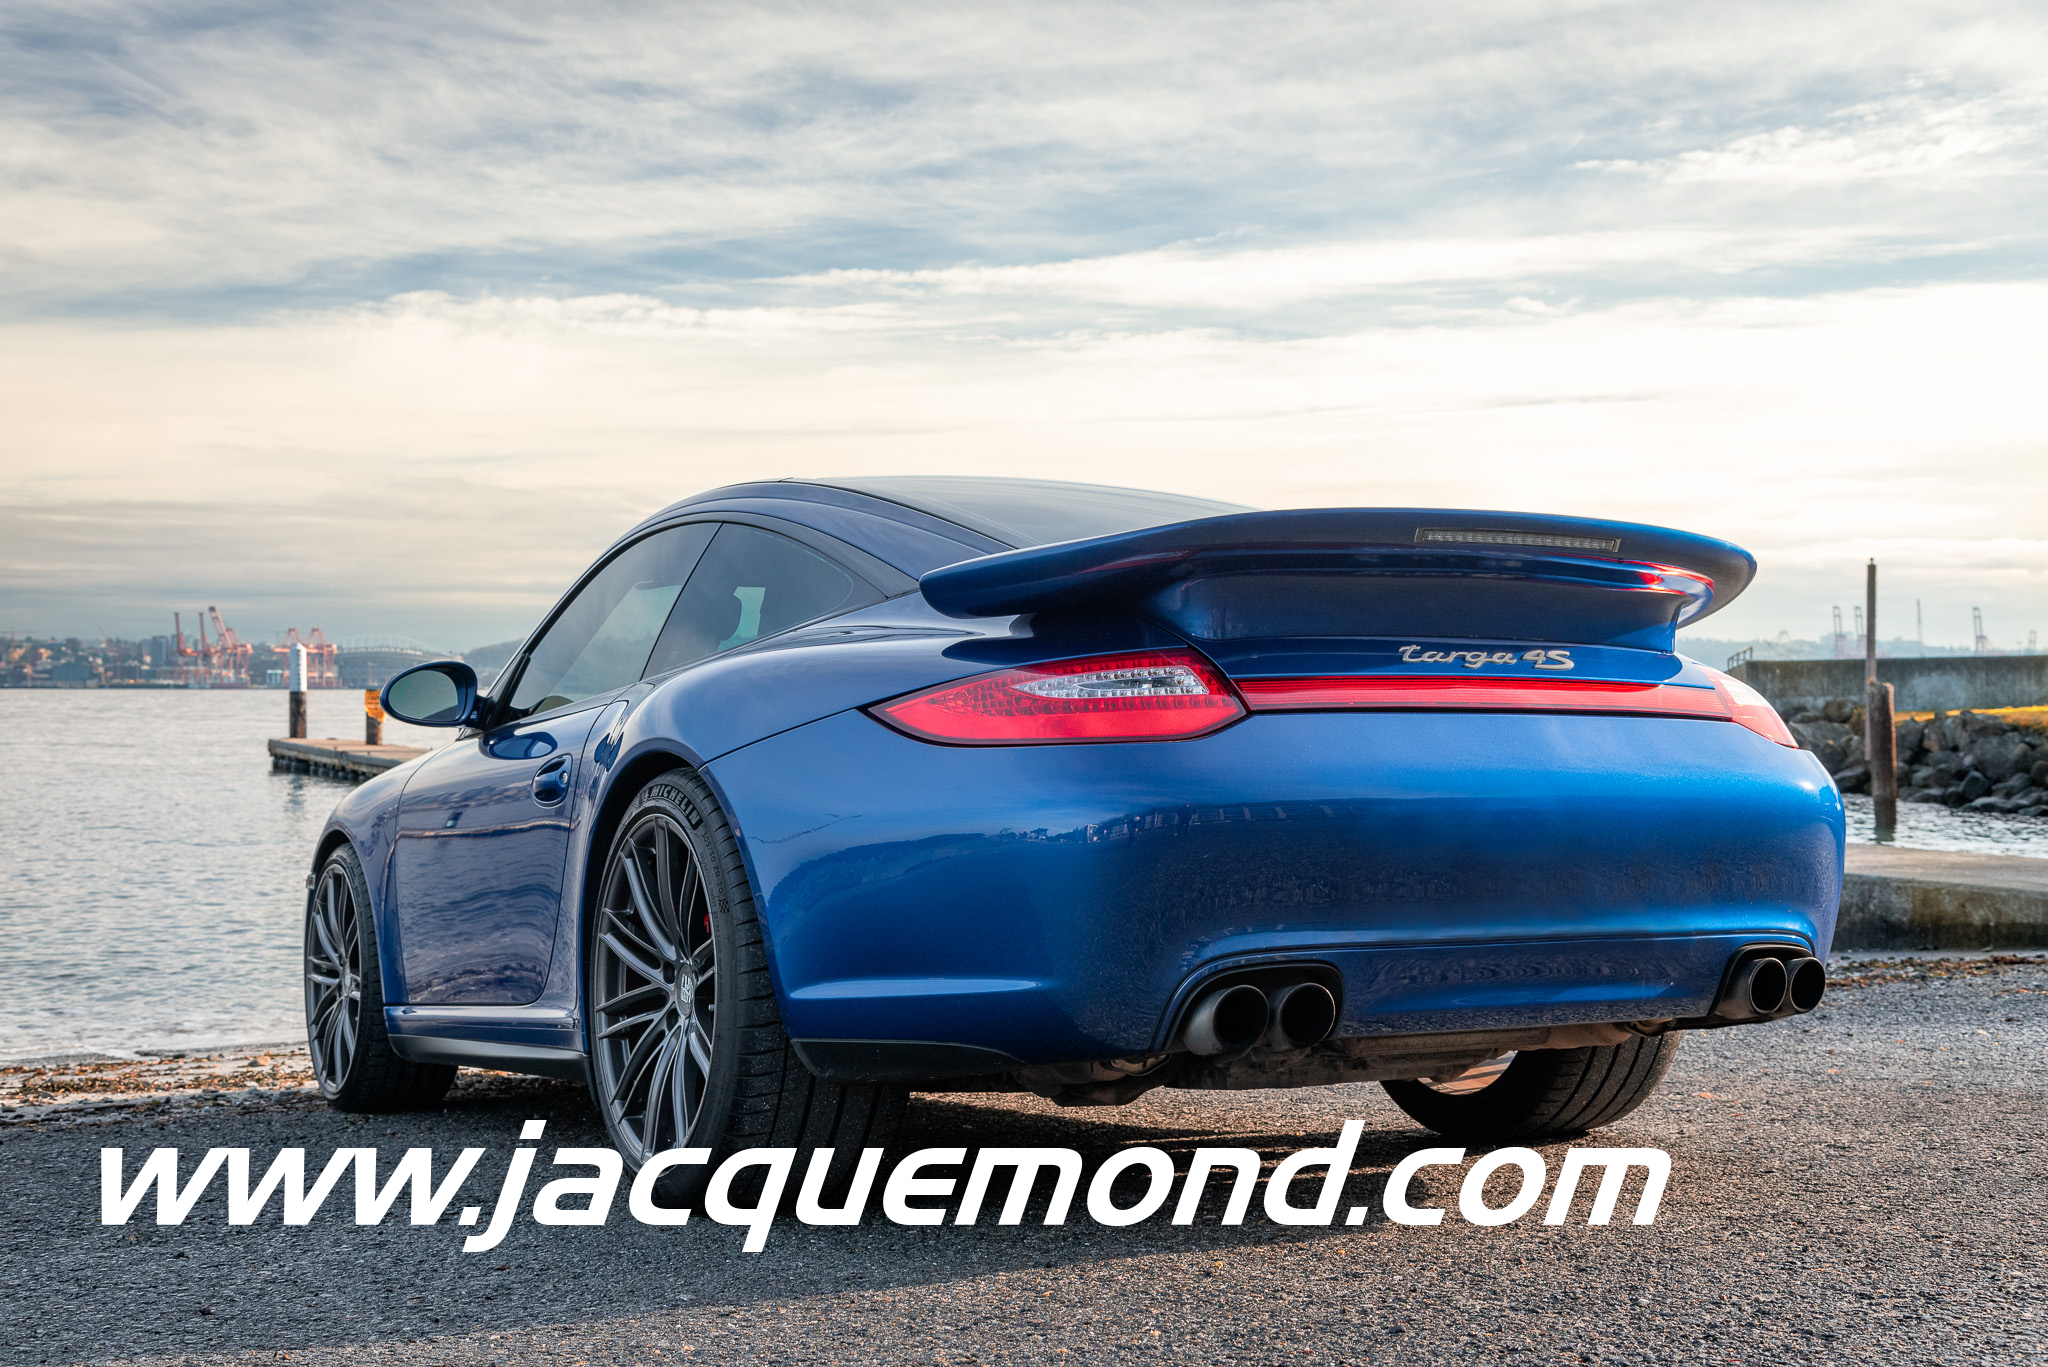 Darus rear wing for Porsche 997 by Jacquemond